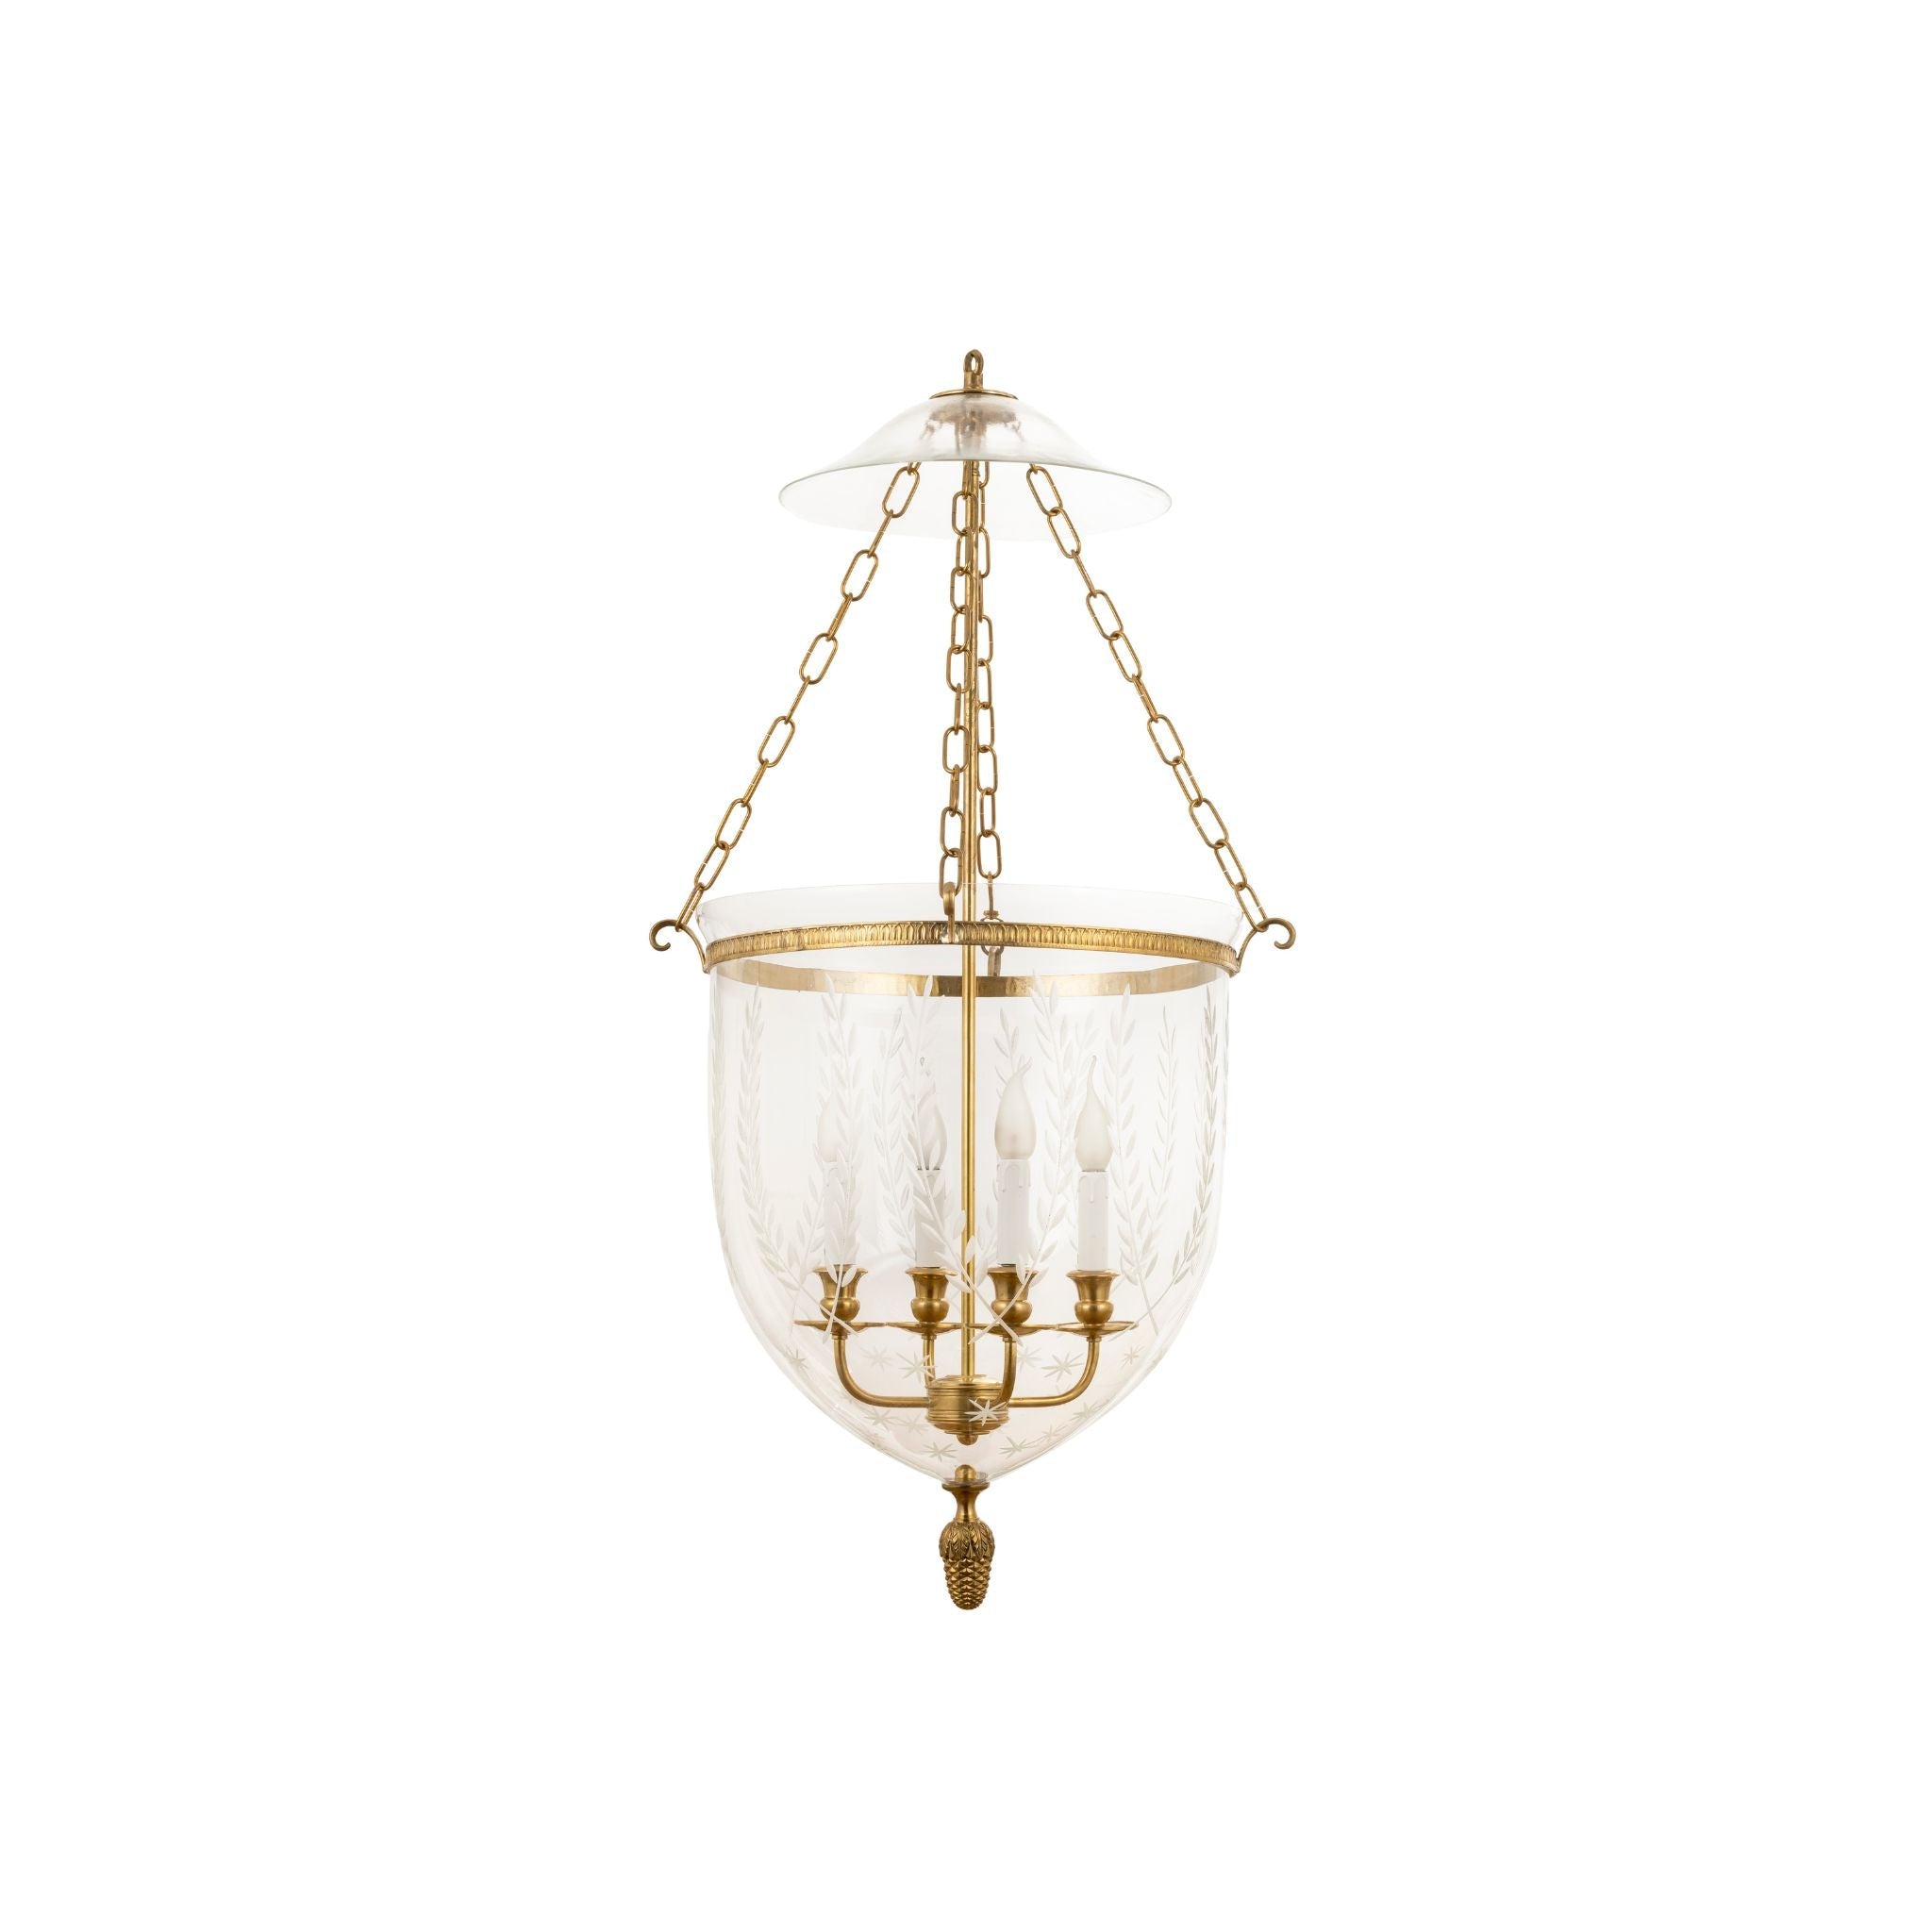 Classic glass and brass hand cut chandelier - ilbronzetto